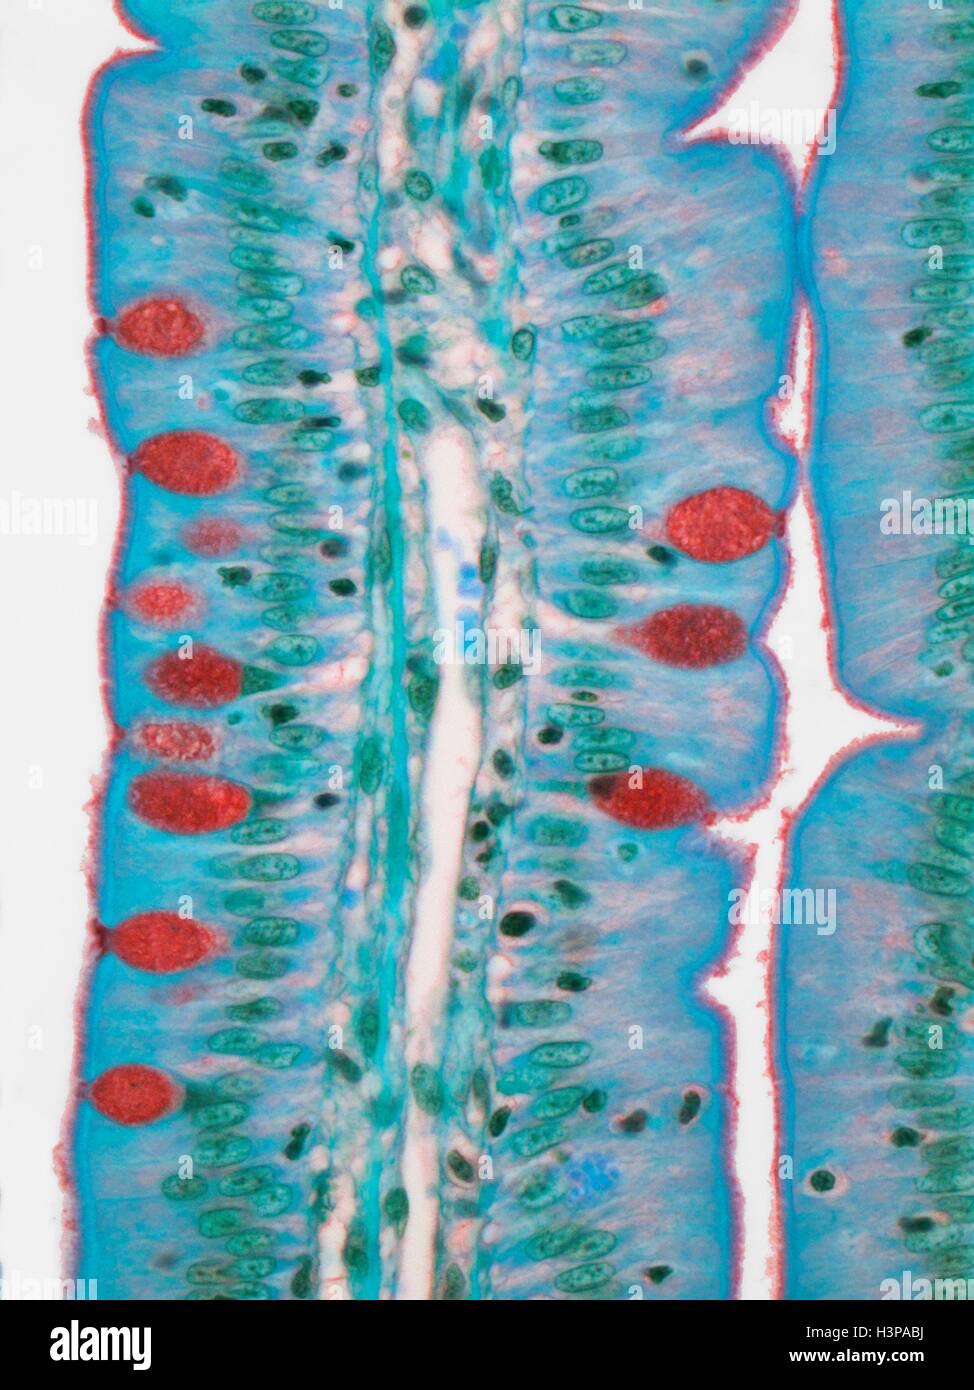 Small intestine. Light micrograph (LM) of a section through the finger-like projections (villi) of the duodenum, the uppermost part of the small intestine. These increase the surface area for the absorption of food. Within the columnar epithelium of the outer surface (blue) are goblet cells (red), which secrete mucus to lubricate food and prevent self-digestion. The lamina propria (central core, blue) contains the blood supply that transports the products of digestion. Magnification: x500 when printed at 10 centimetres wide. Stock Photo